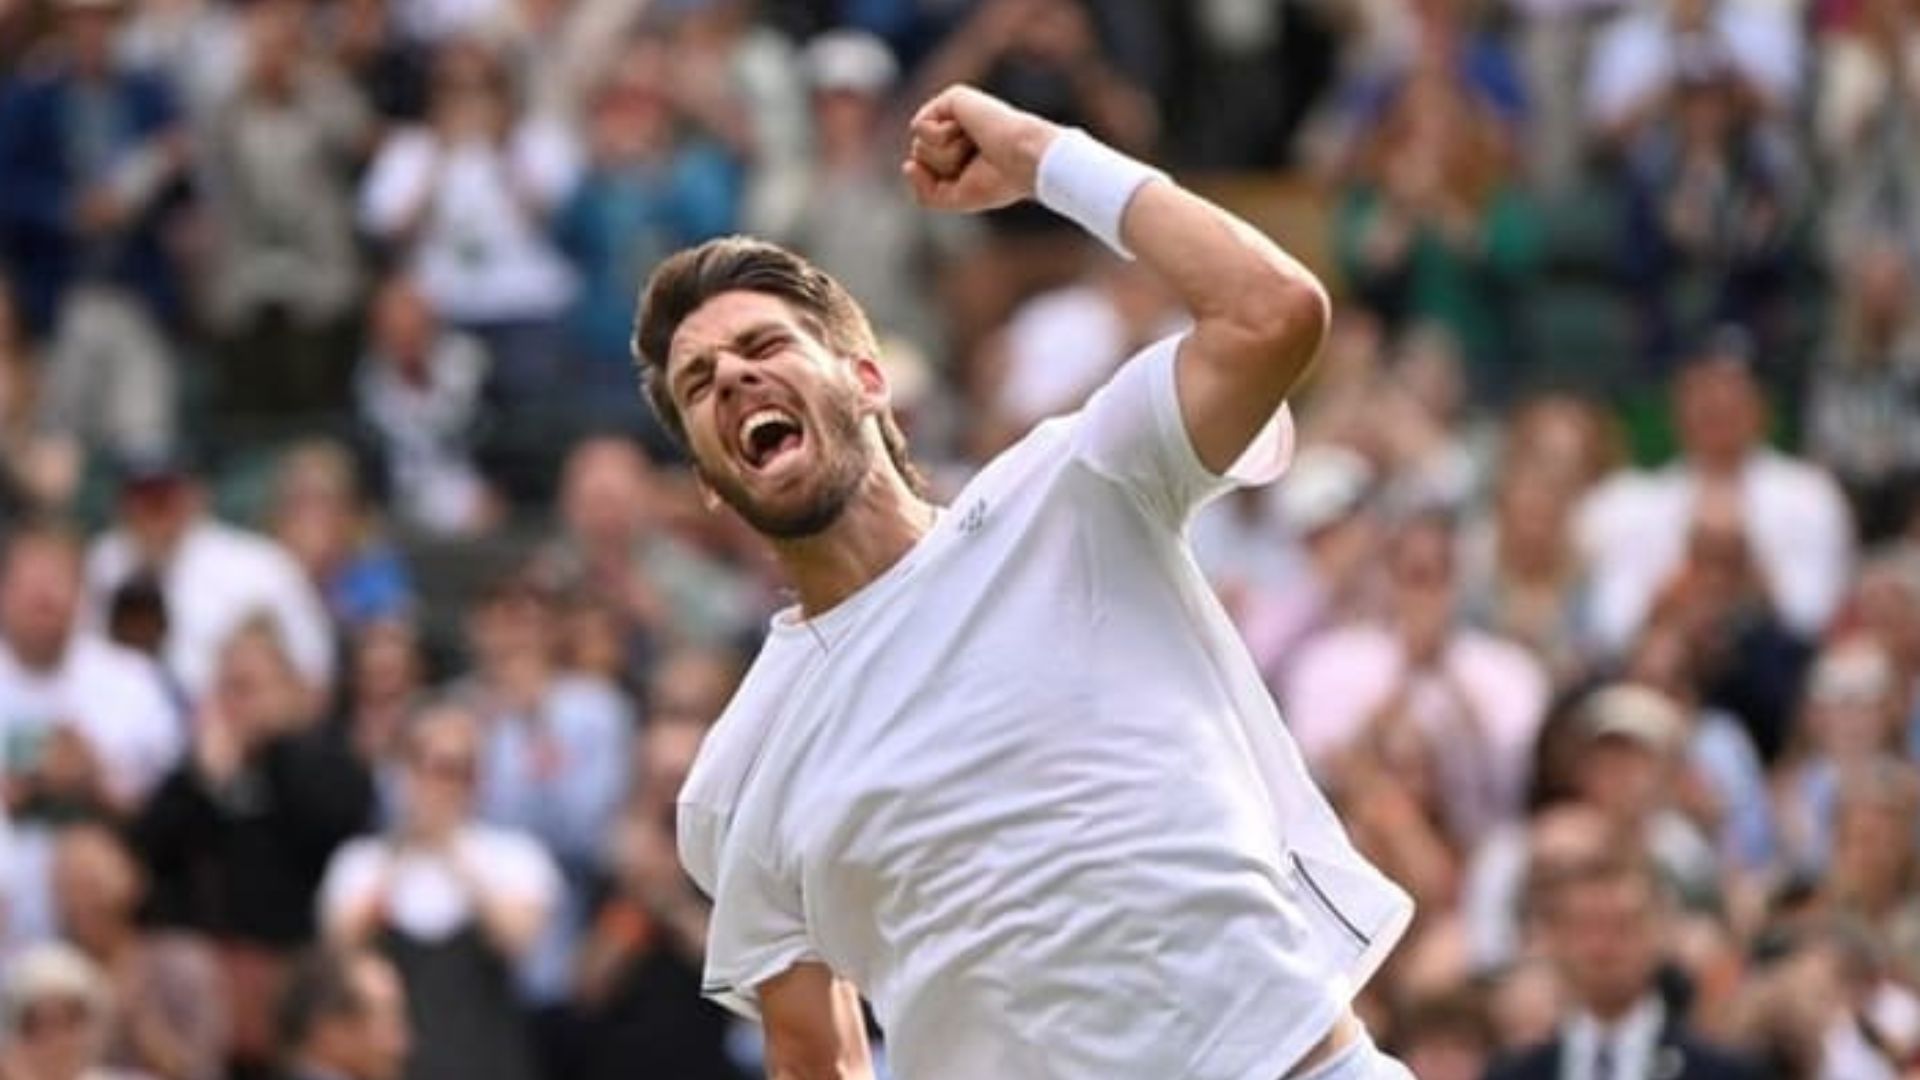 Norrie embracing the tension at Wimbledon